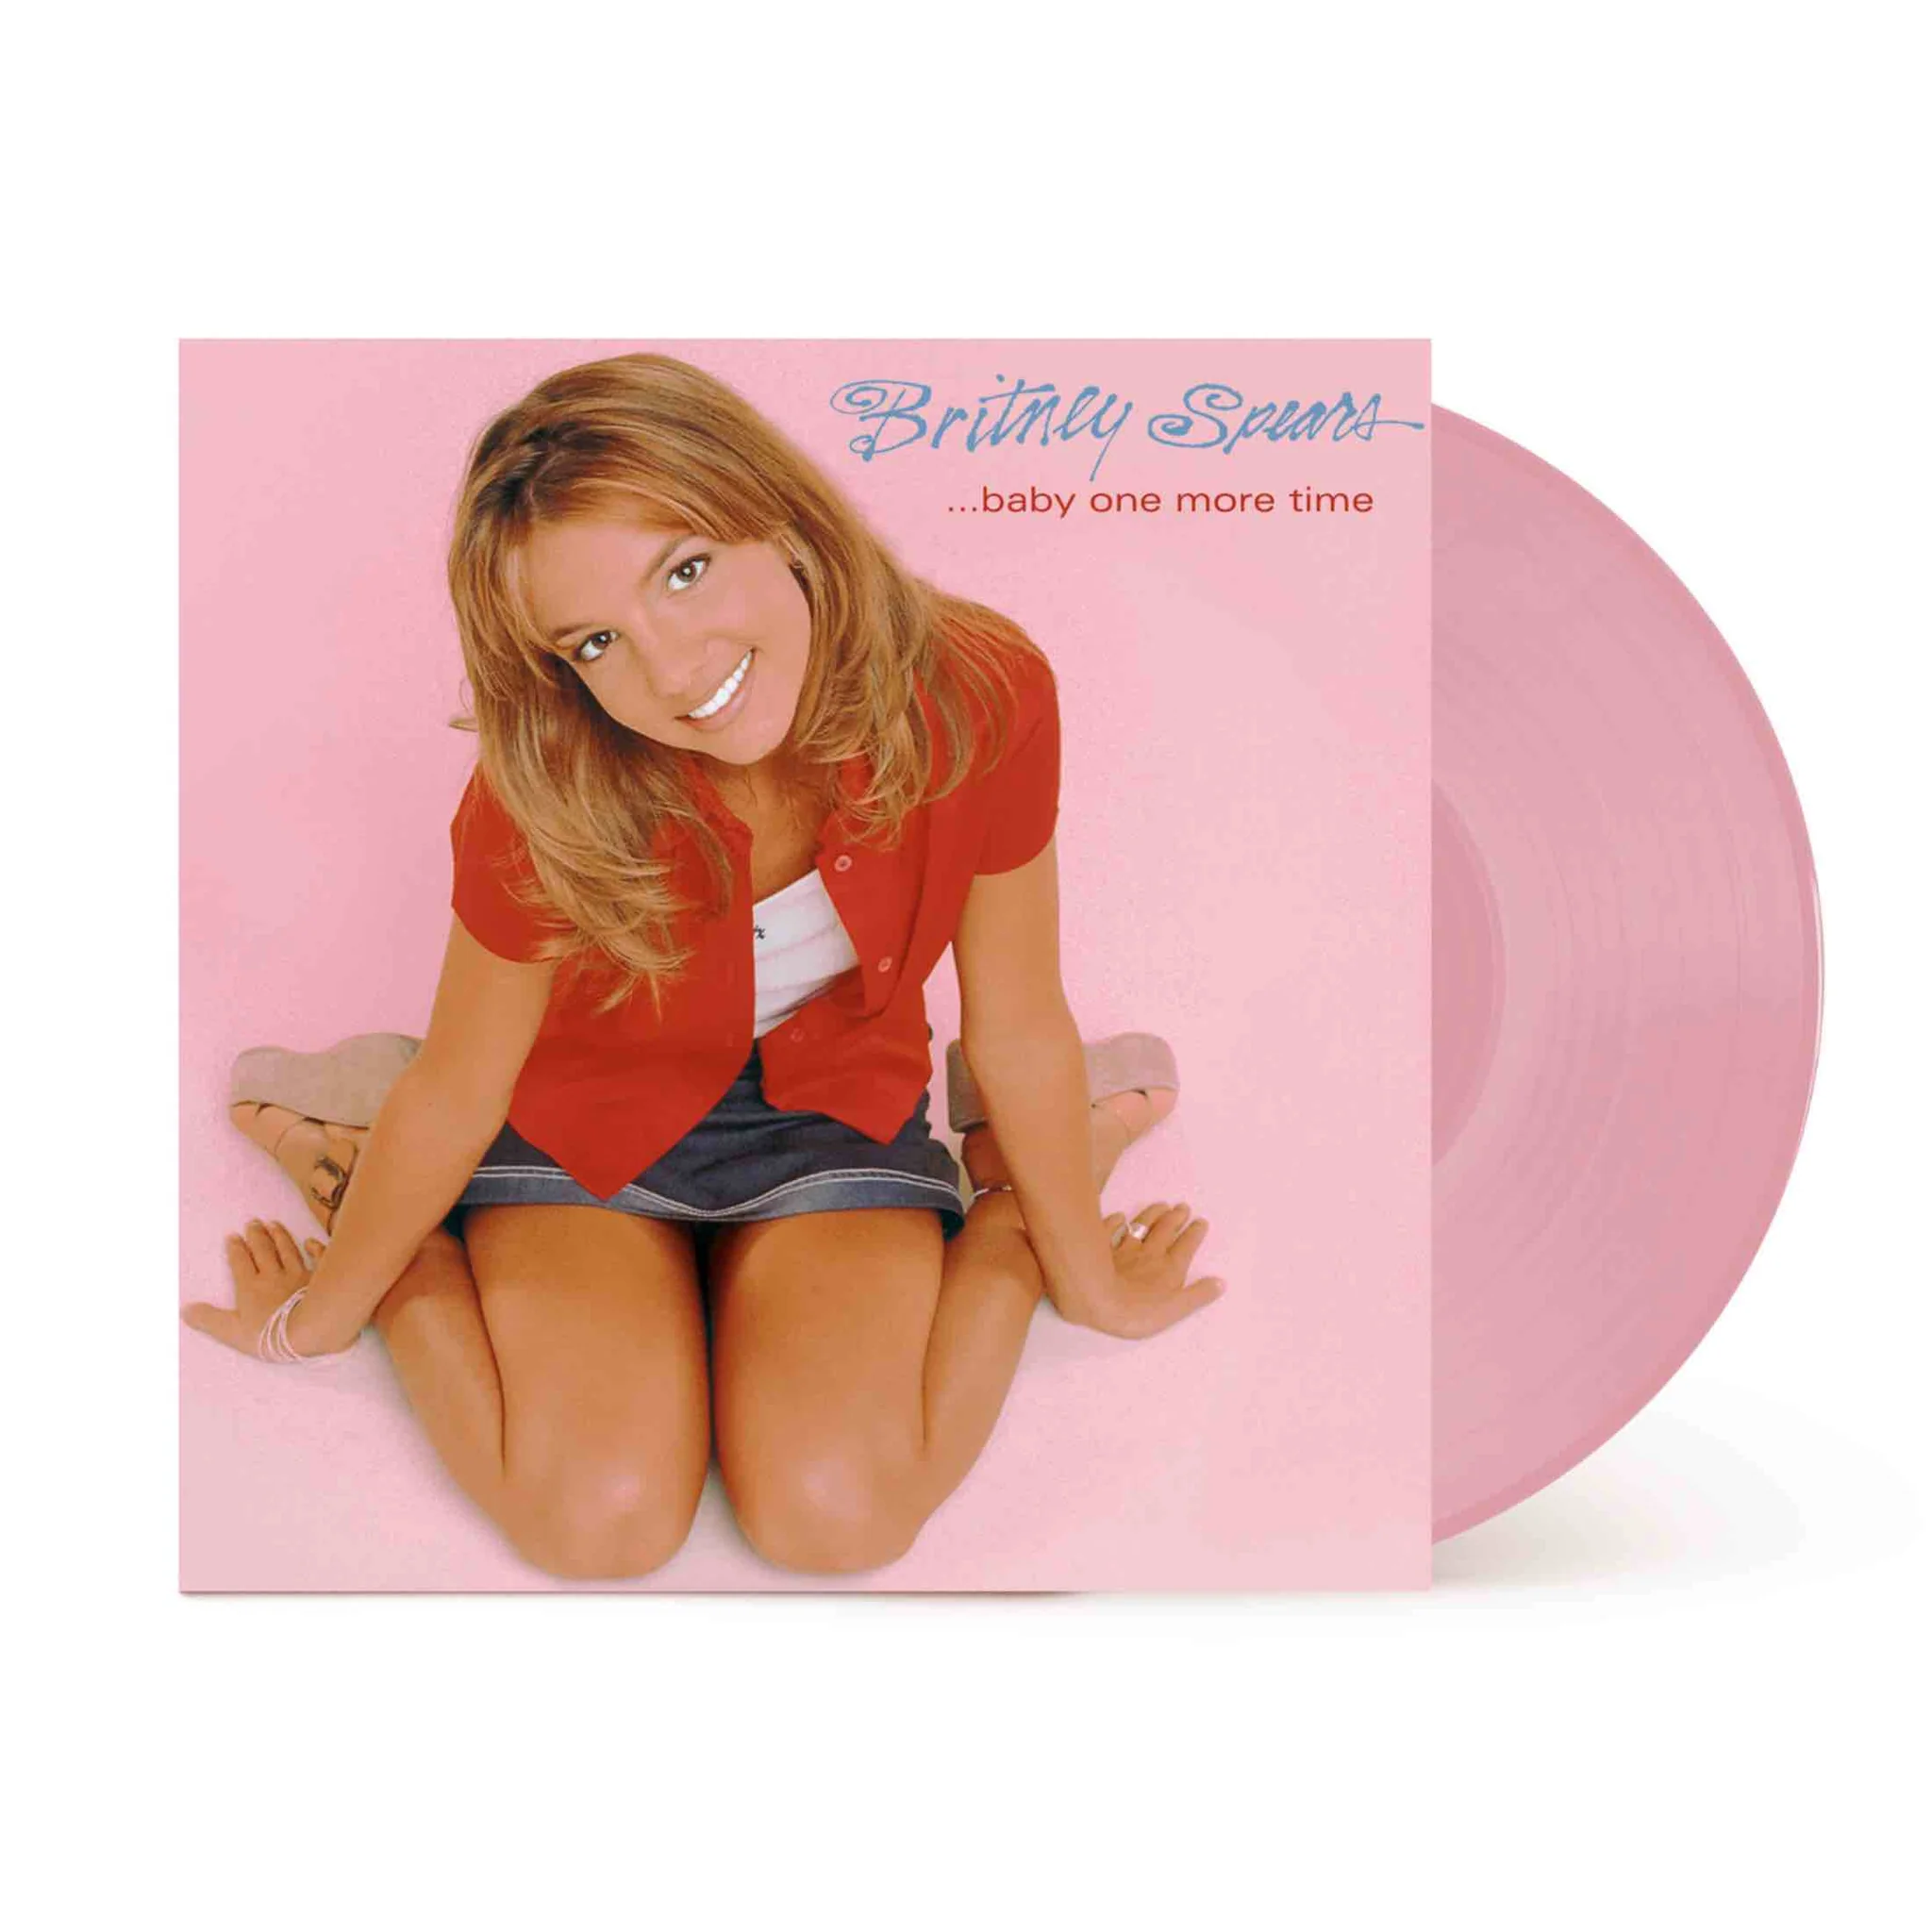 Britney Spears "...Baby On More Time" Pink LP